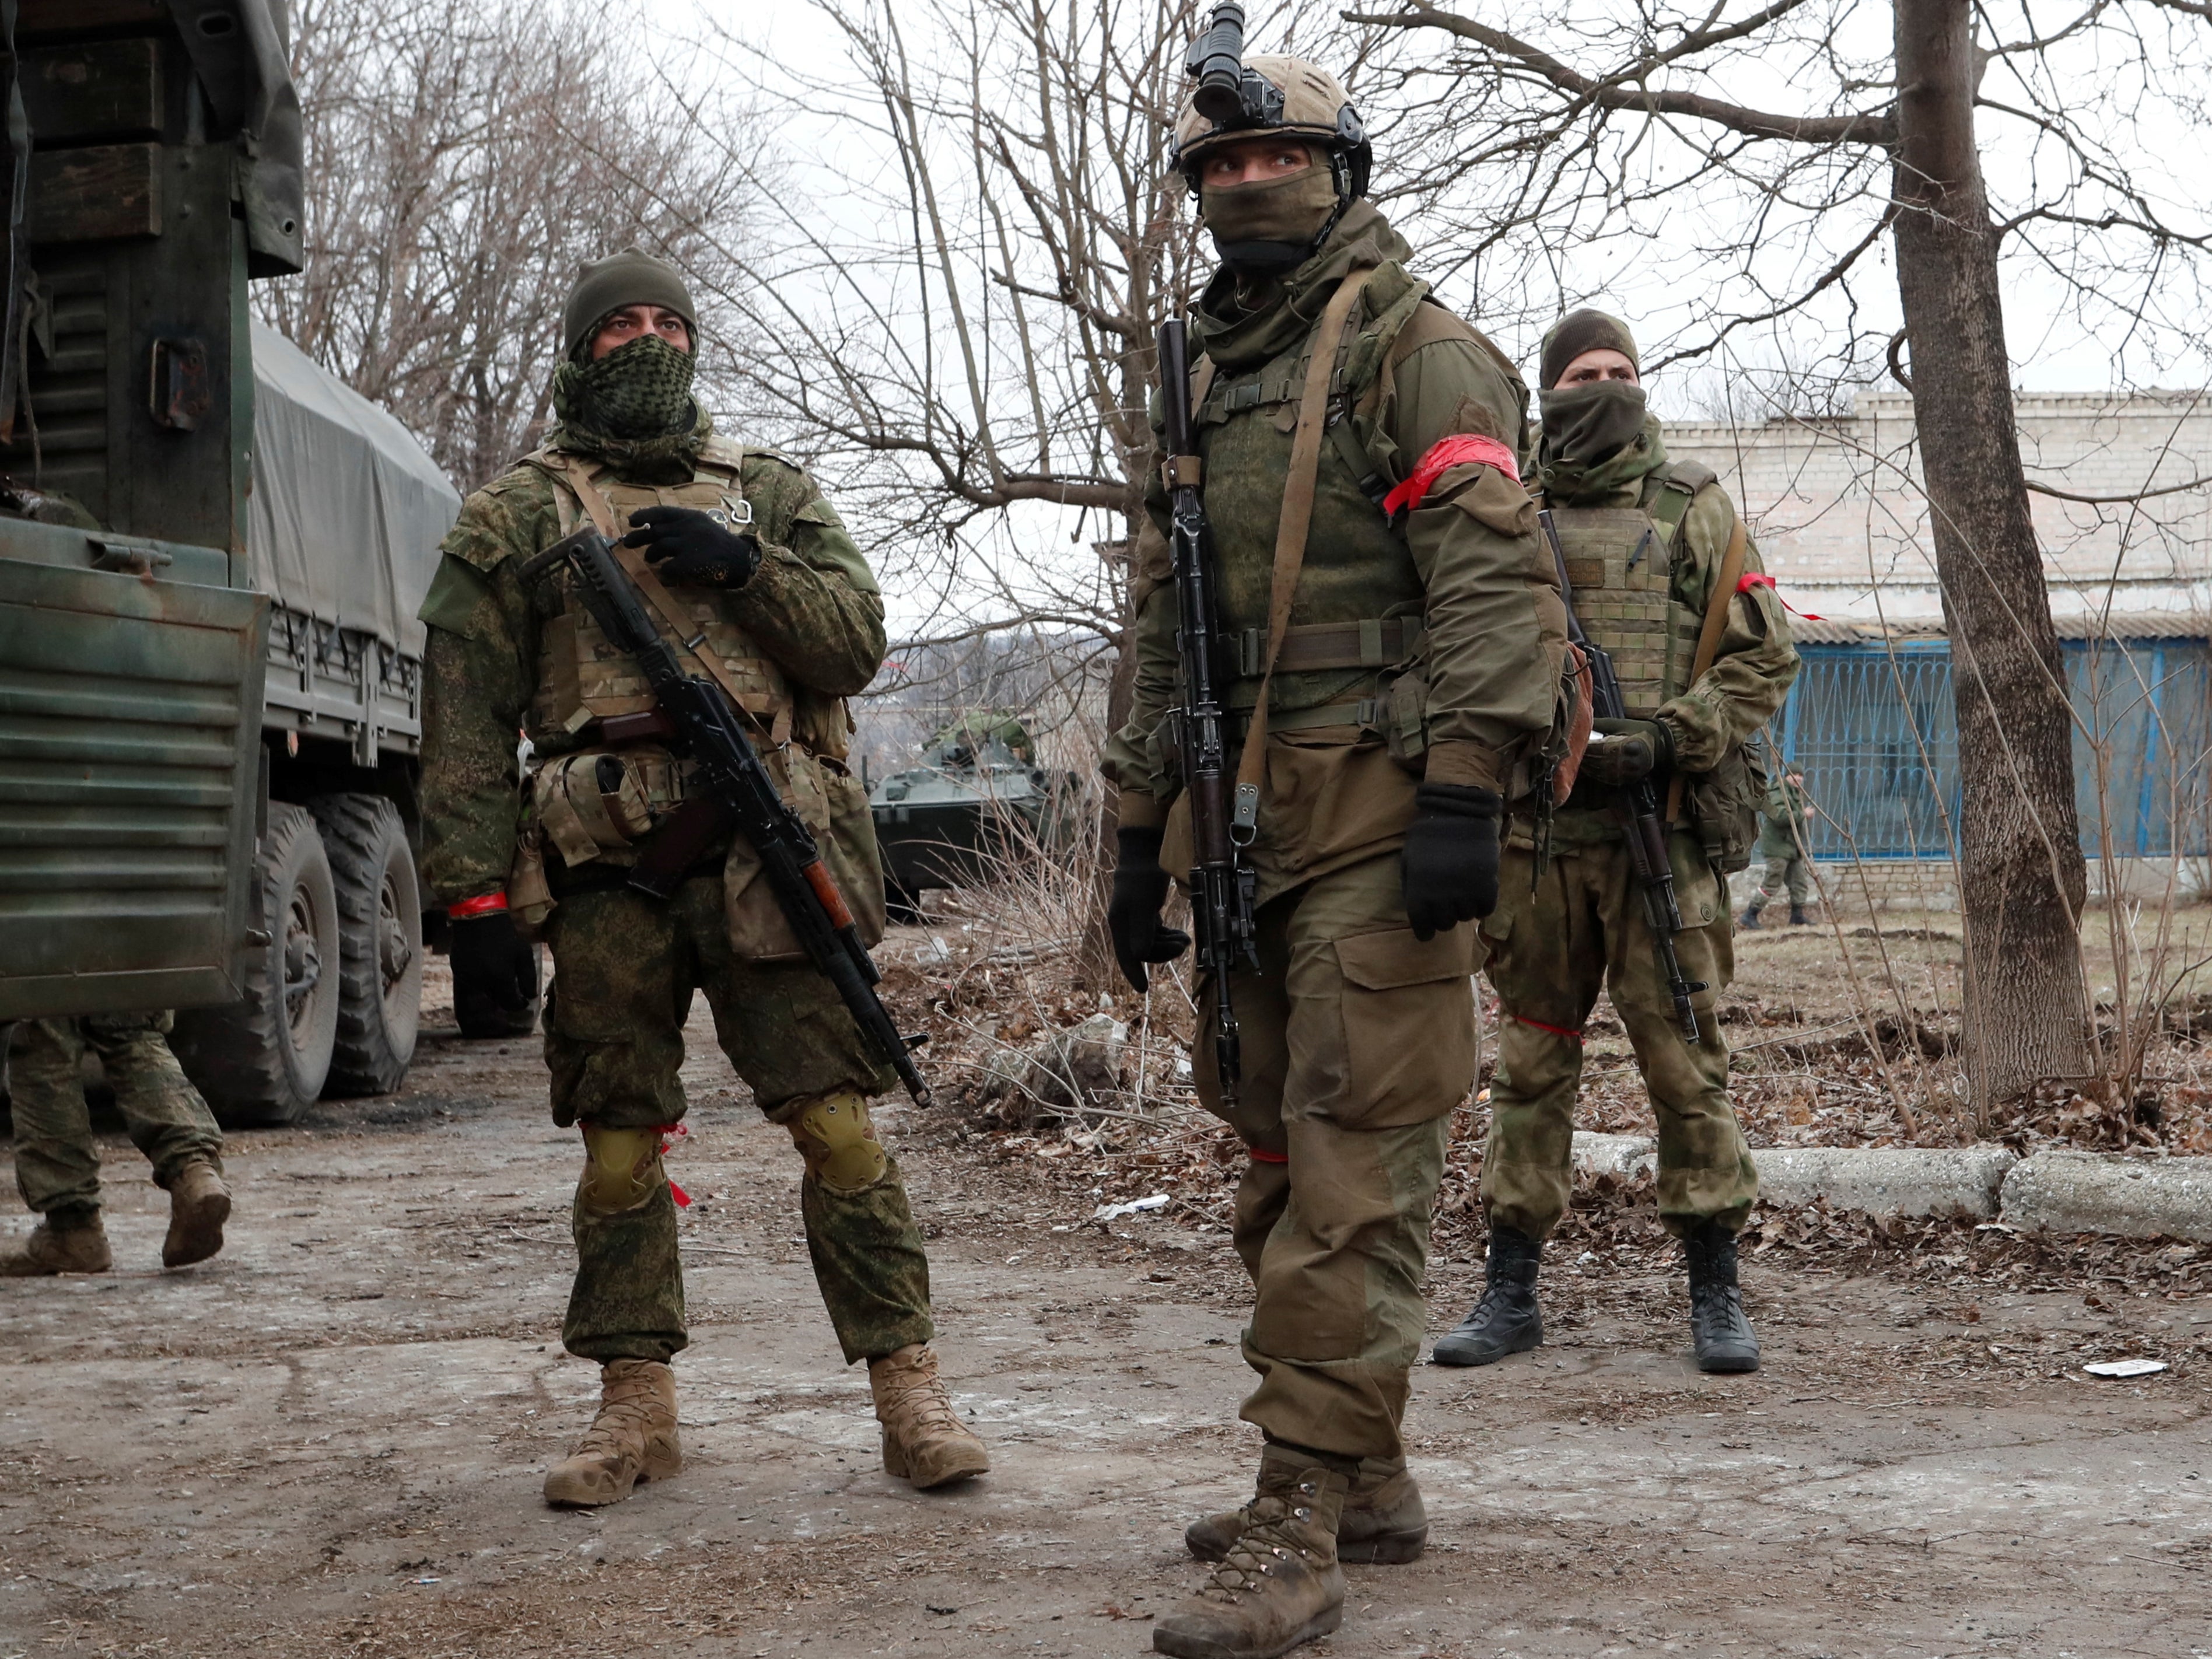 Pro-Russian troops in separatist-controlled Donetsk